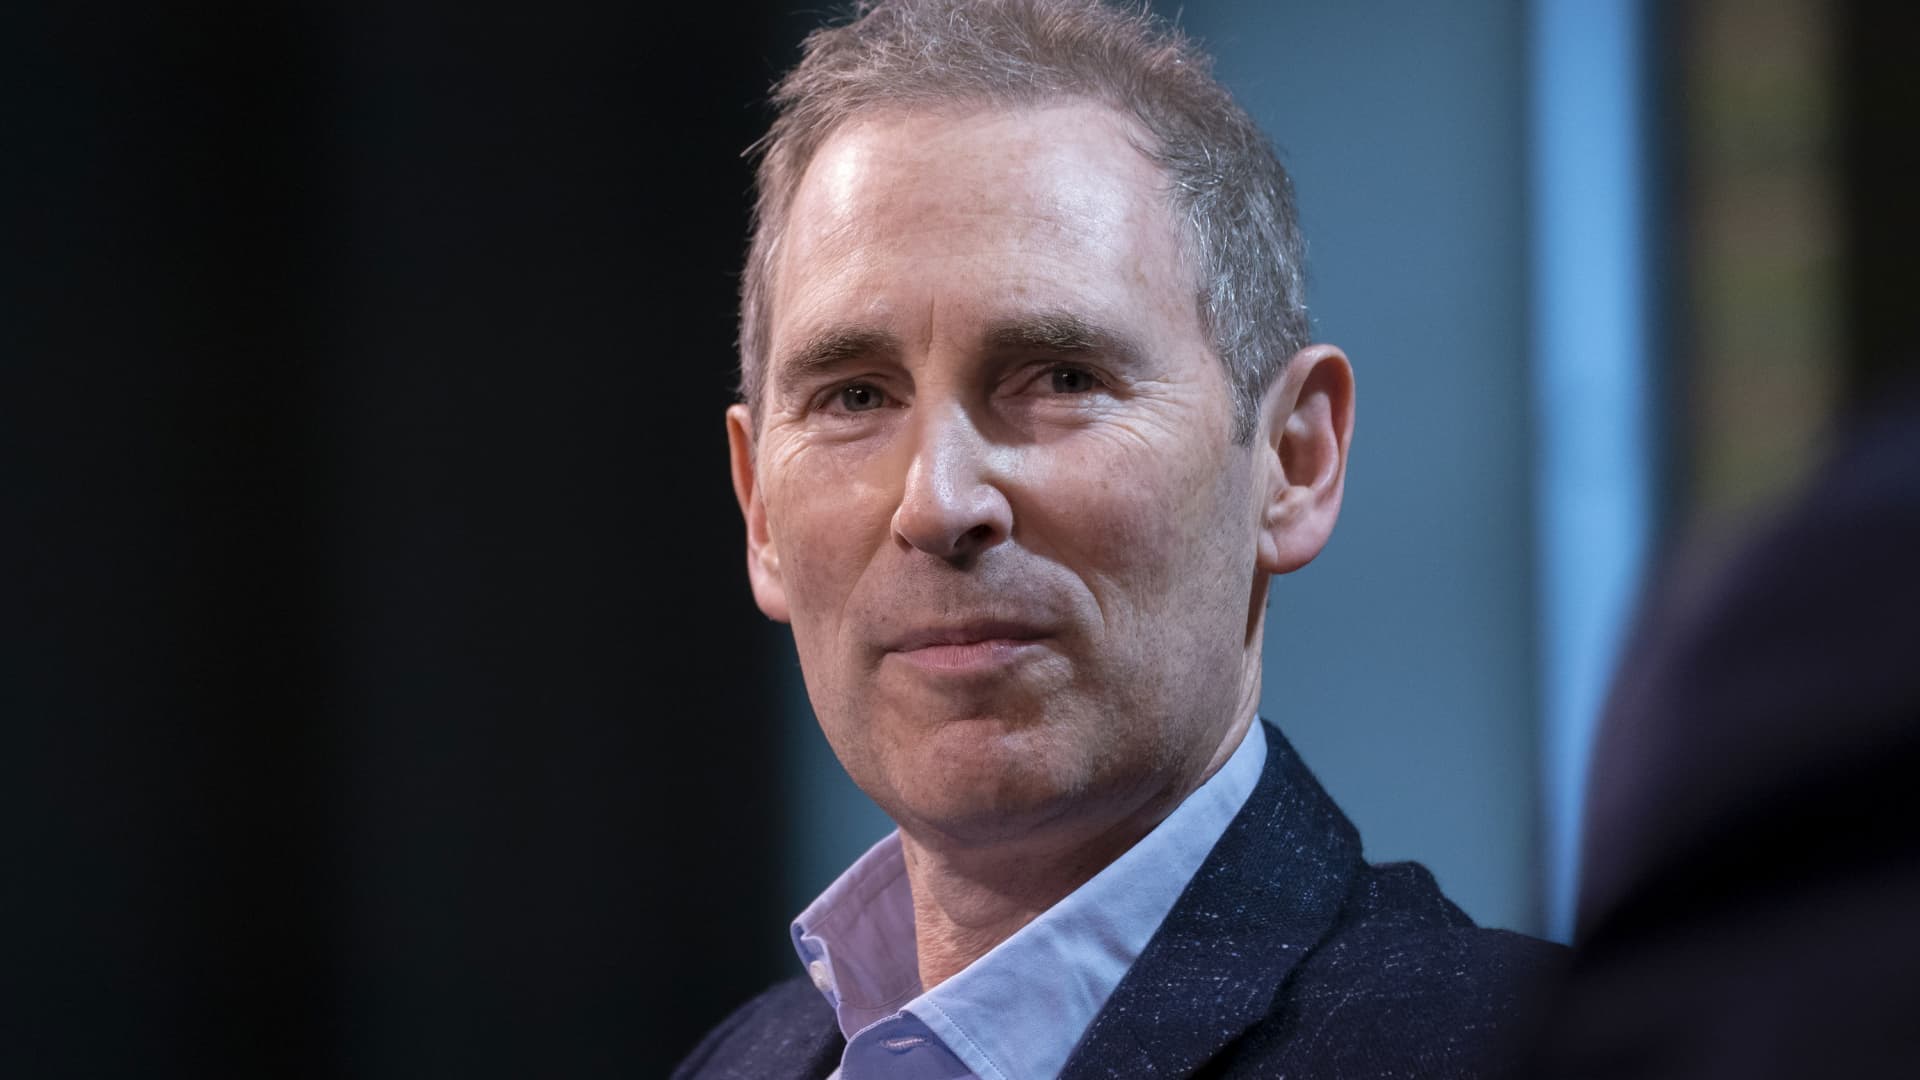 Amazon CEO Andy Jassy says he has no plan to force workers to return to the office